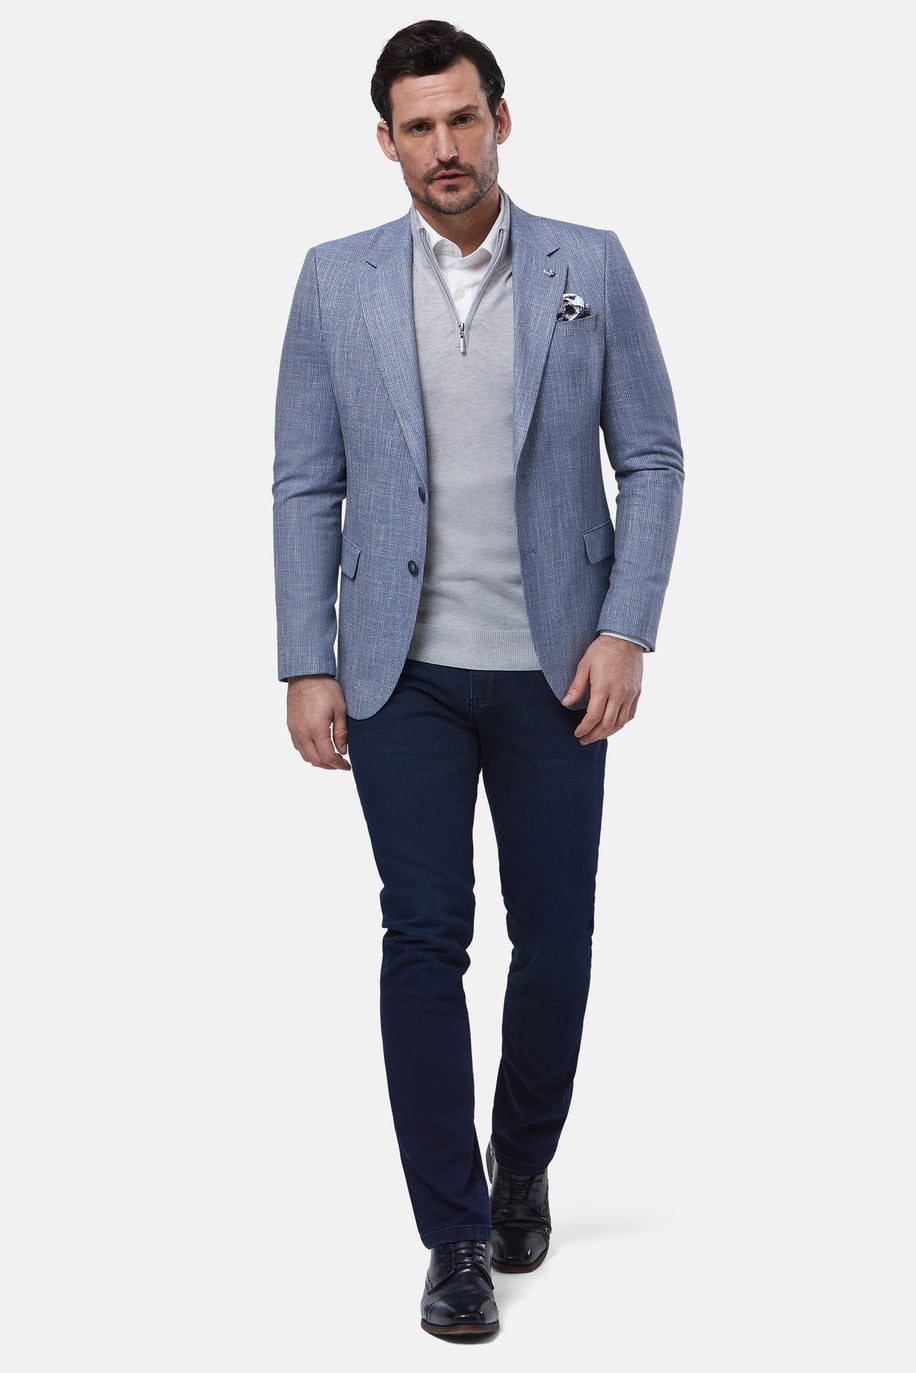 Tripoli Tapered Fit Ice Blazer front